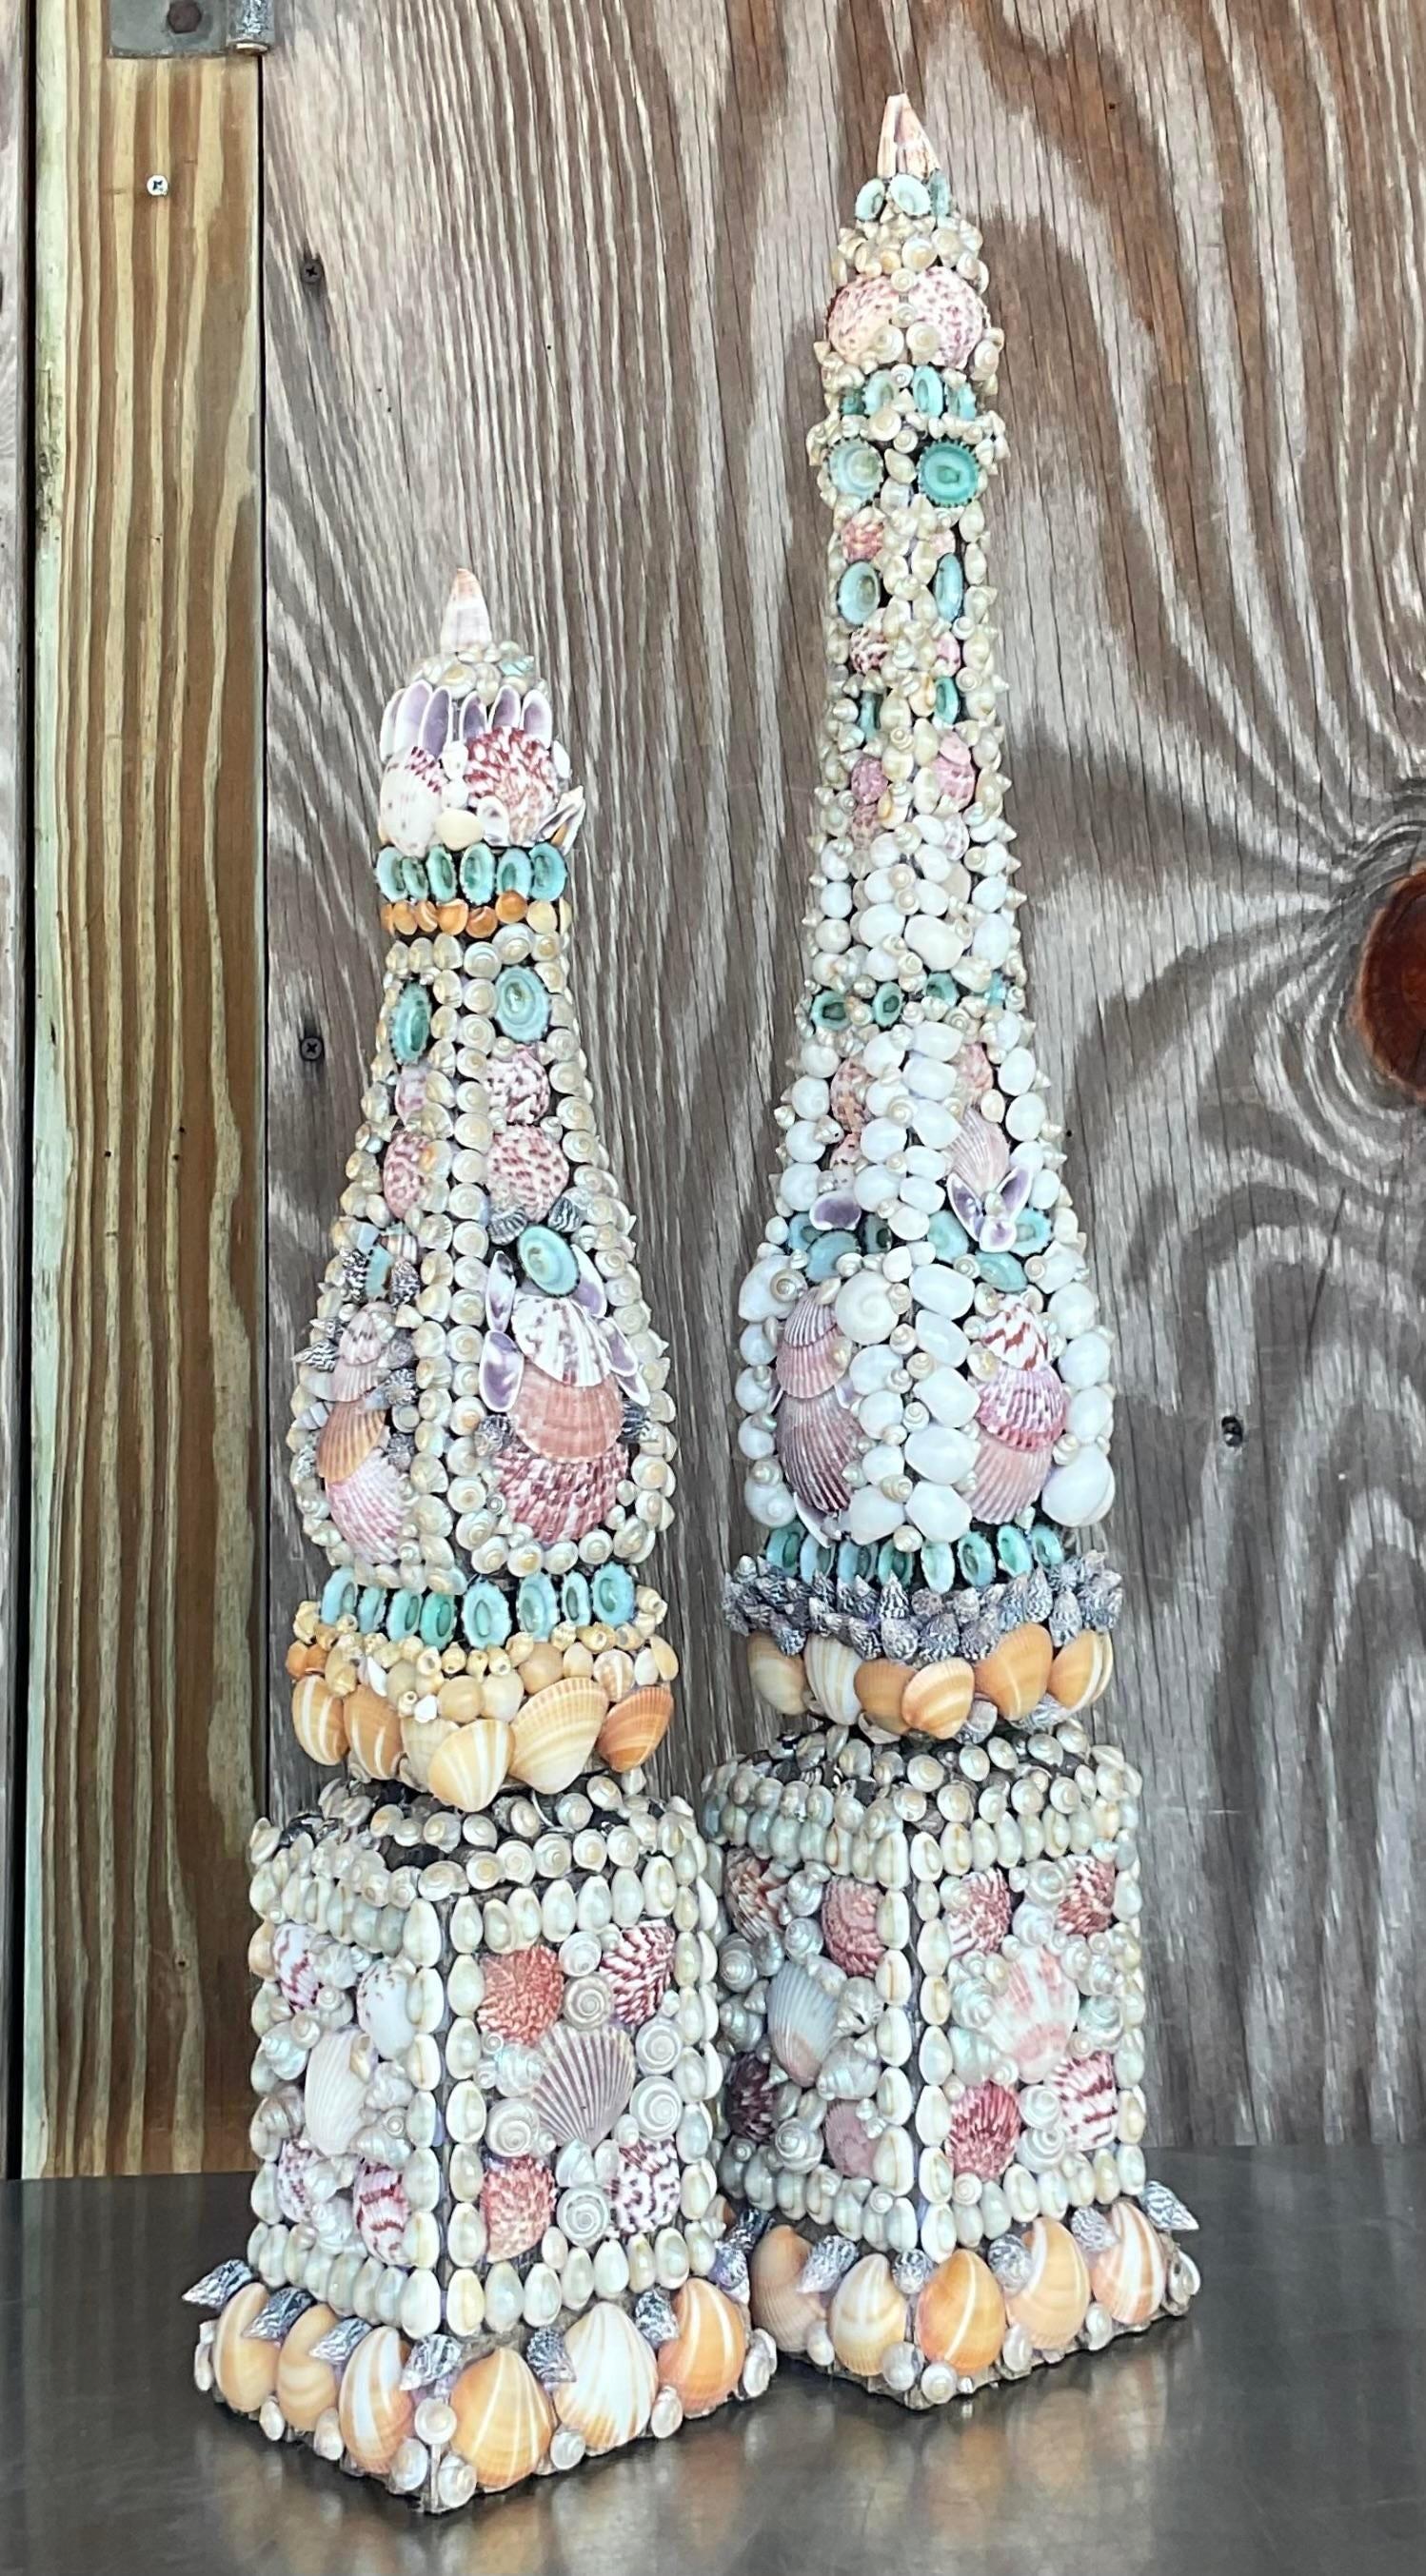 Vintage Coastal Shell Encrusted Obelisks - Set of 2 In Good Condition For Sale In west palm beach, FL